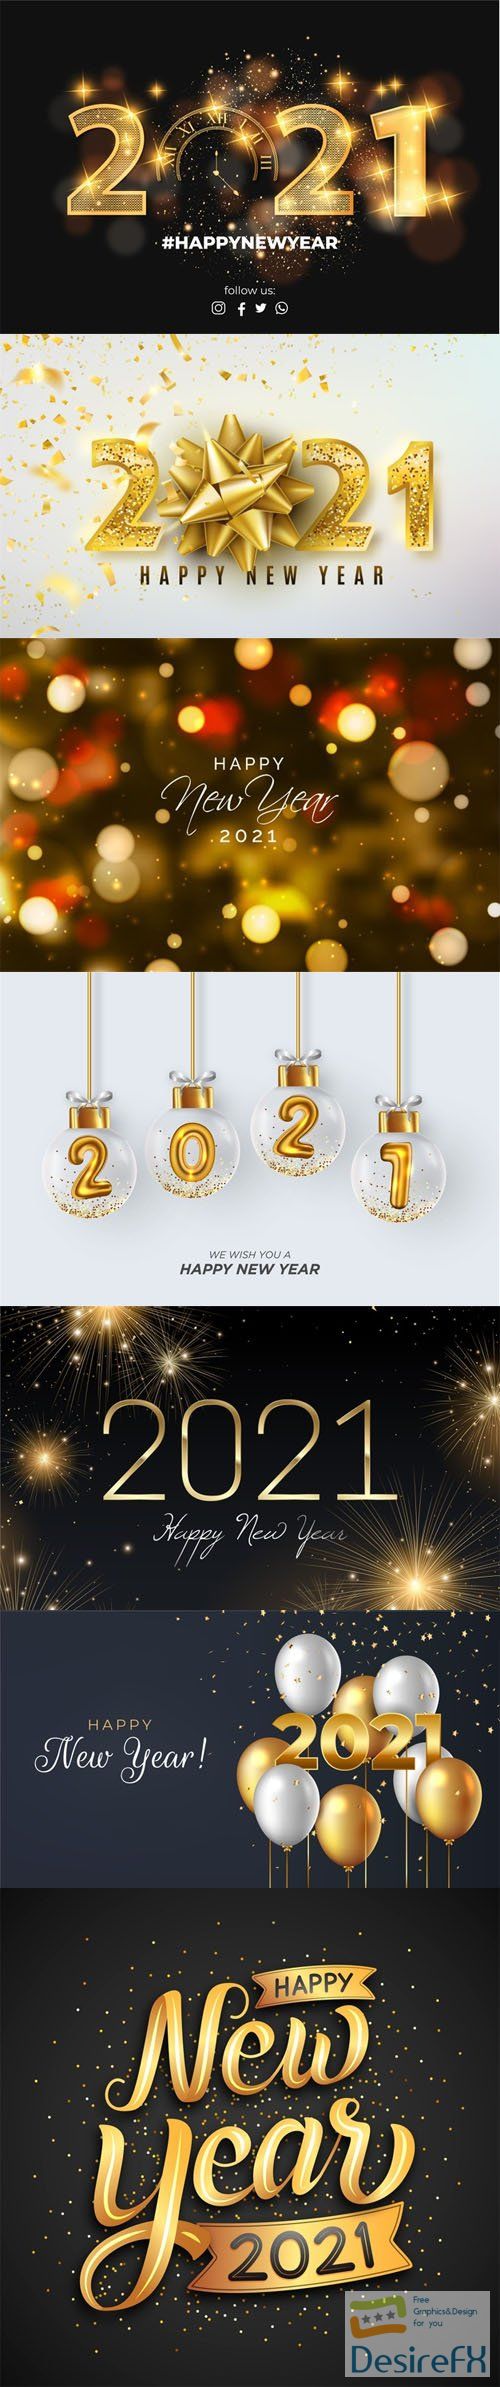 7 Happy New Year 2021 Backgrounds in Vector